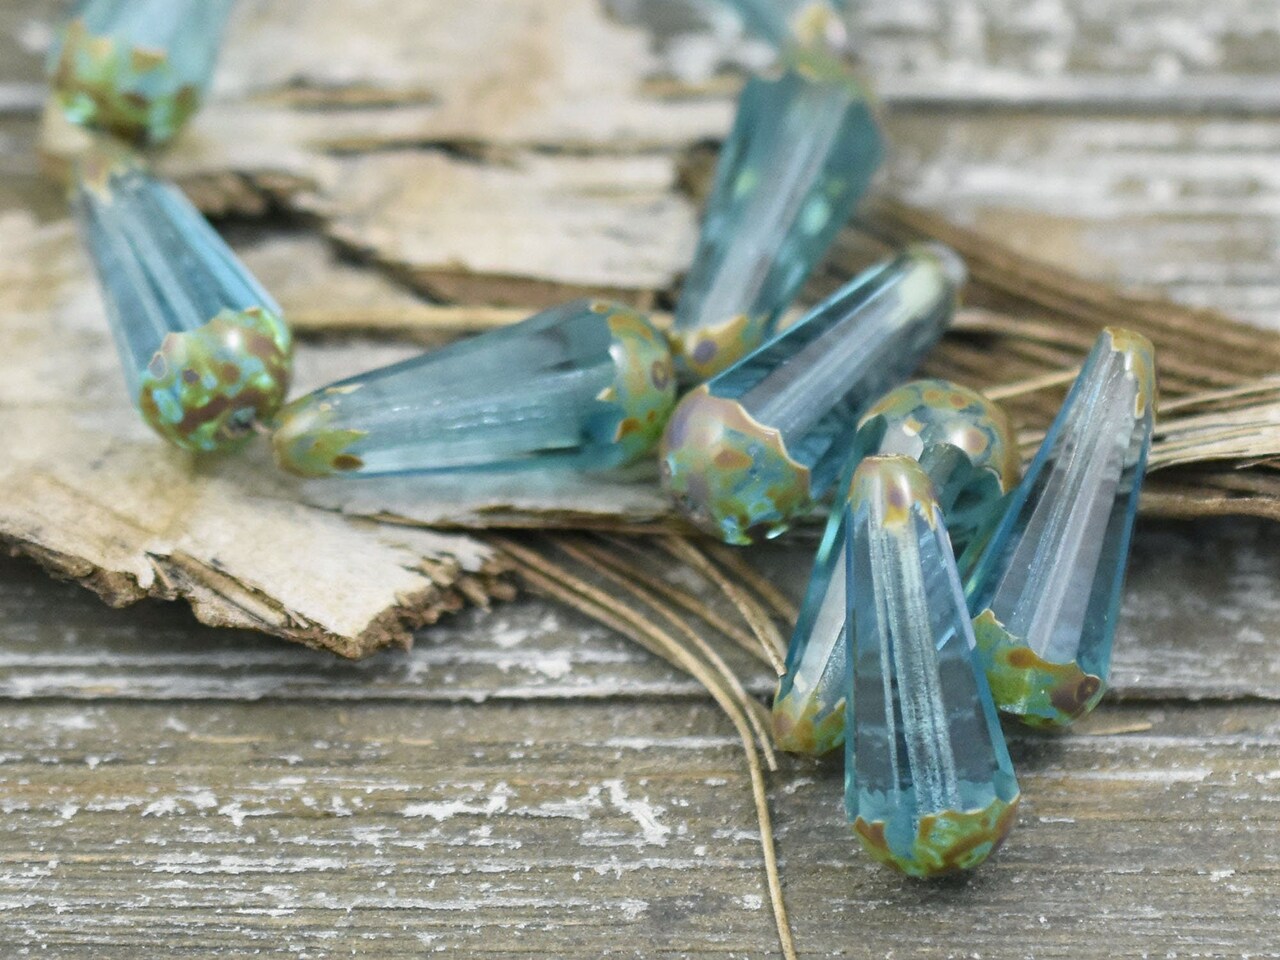 *6* 8x20mm Aqua Picasso Faceted Drop Beads